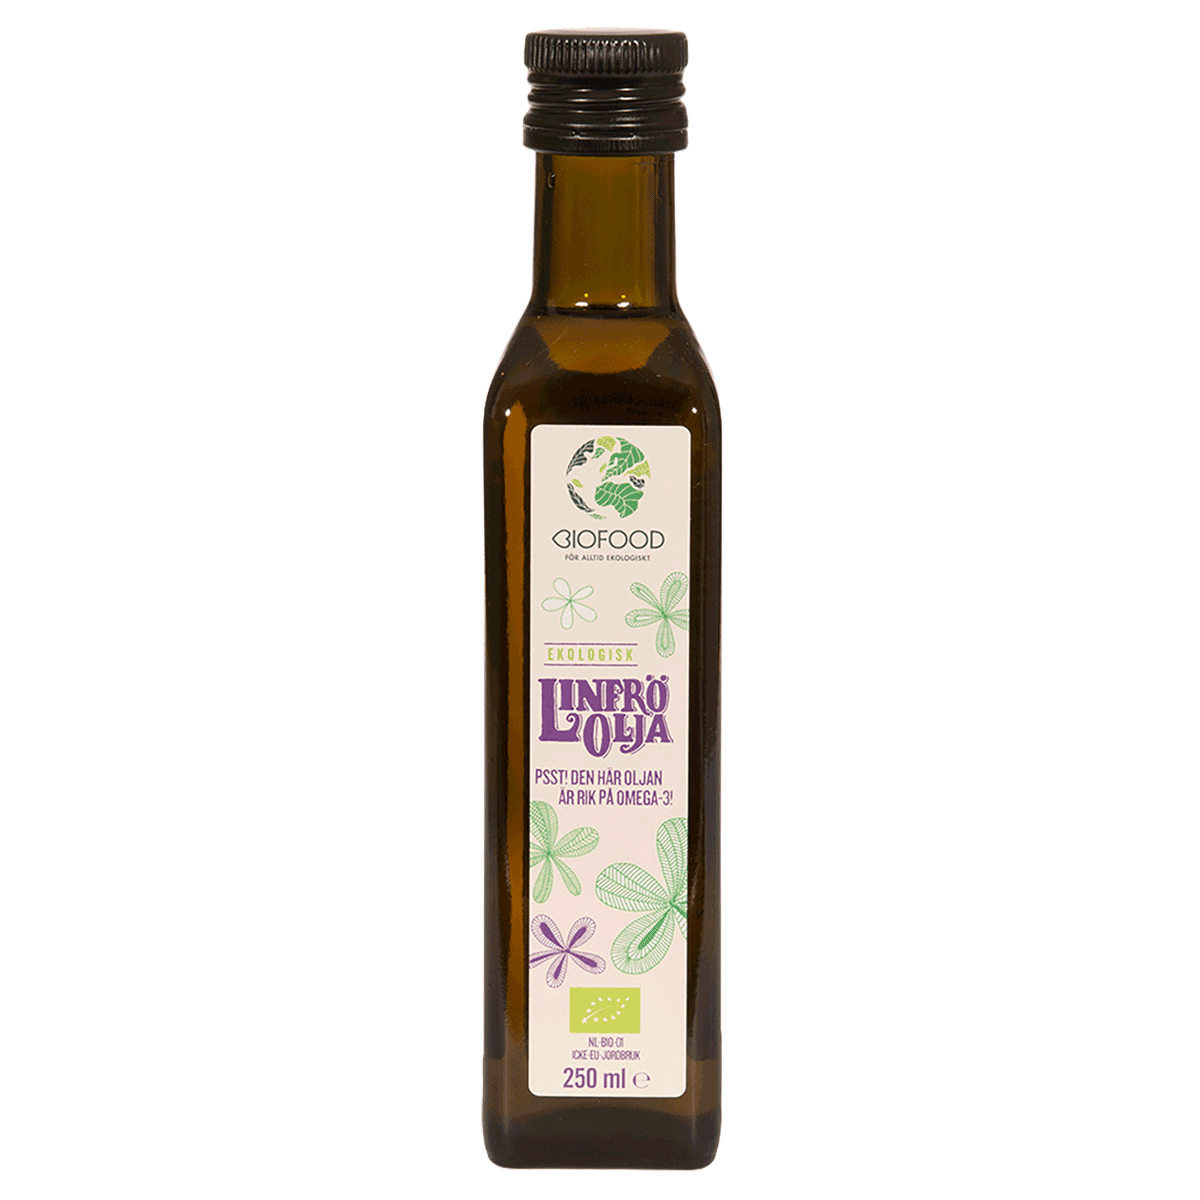 Flaxseed oil from Biofood